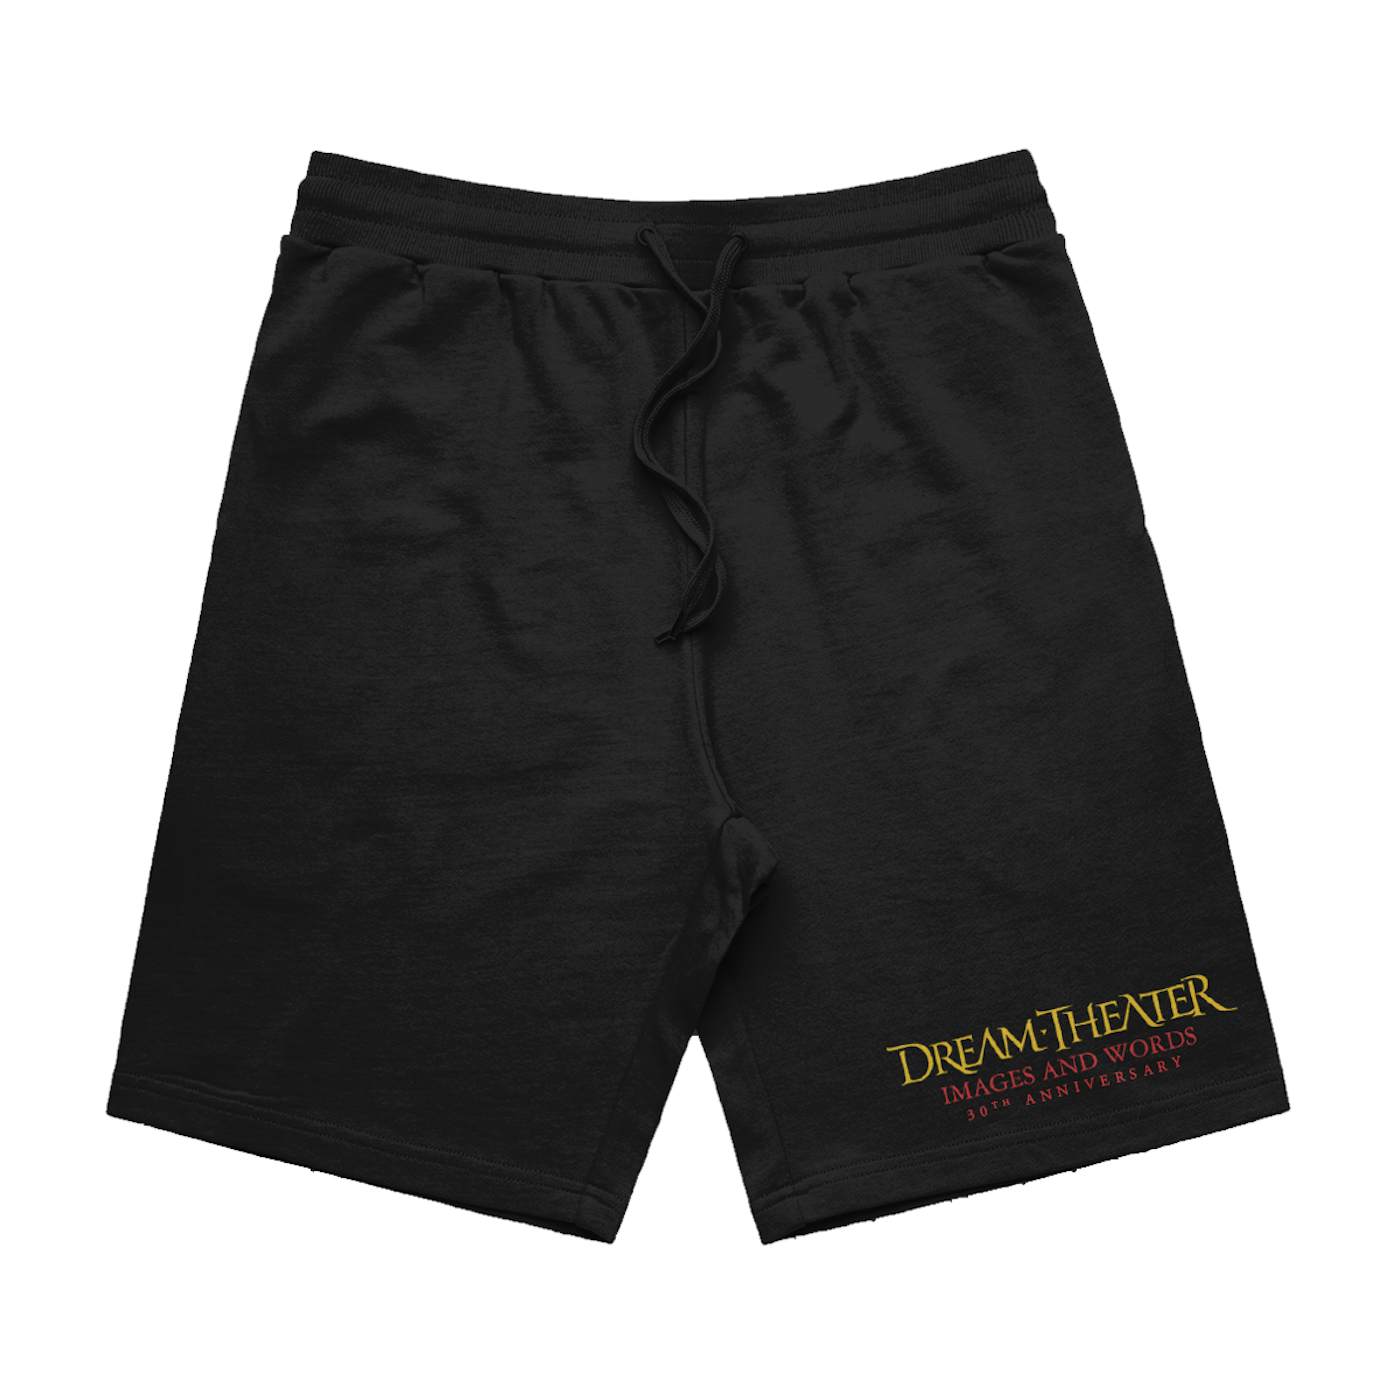 Dream Theater Images and Words 30th Anniversary Logo Shorts